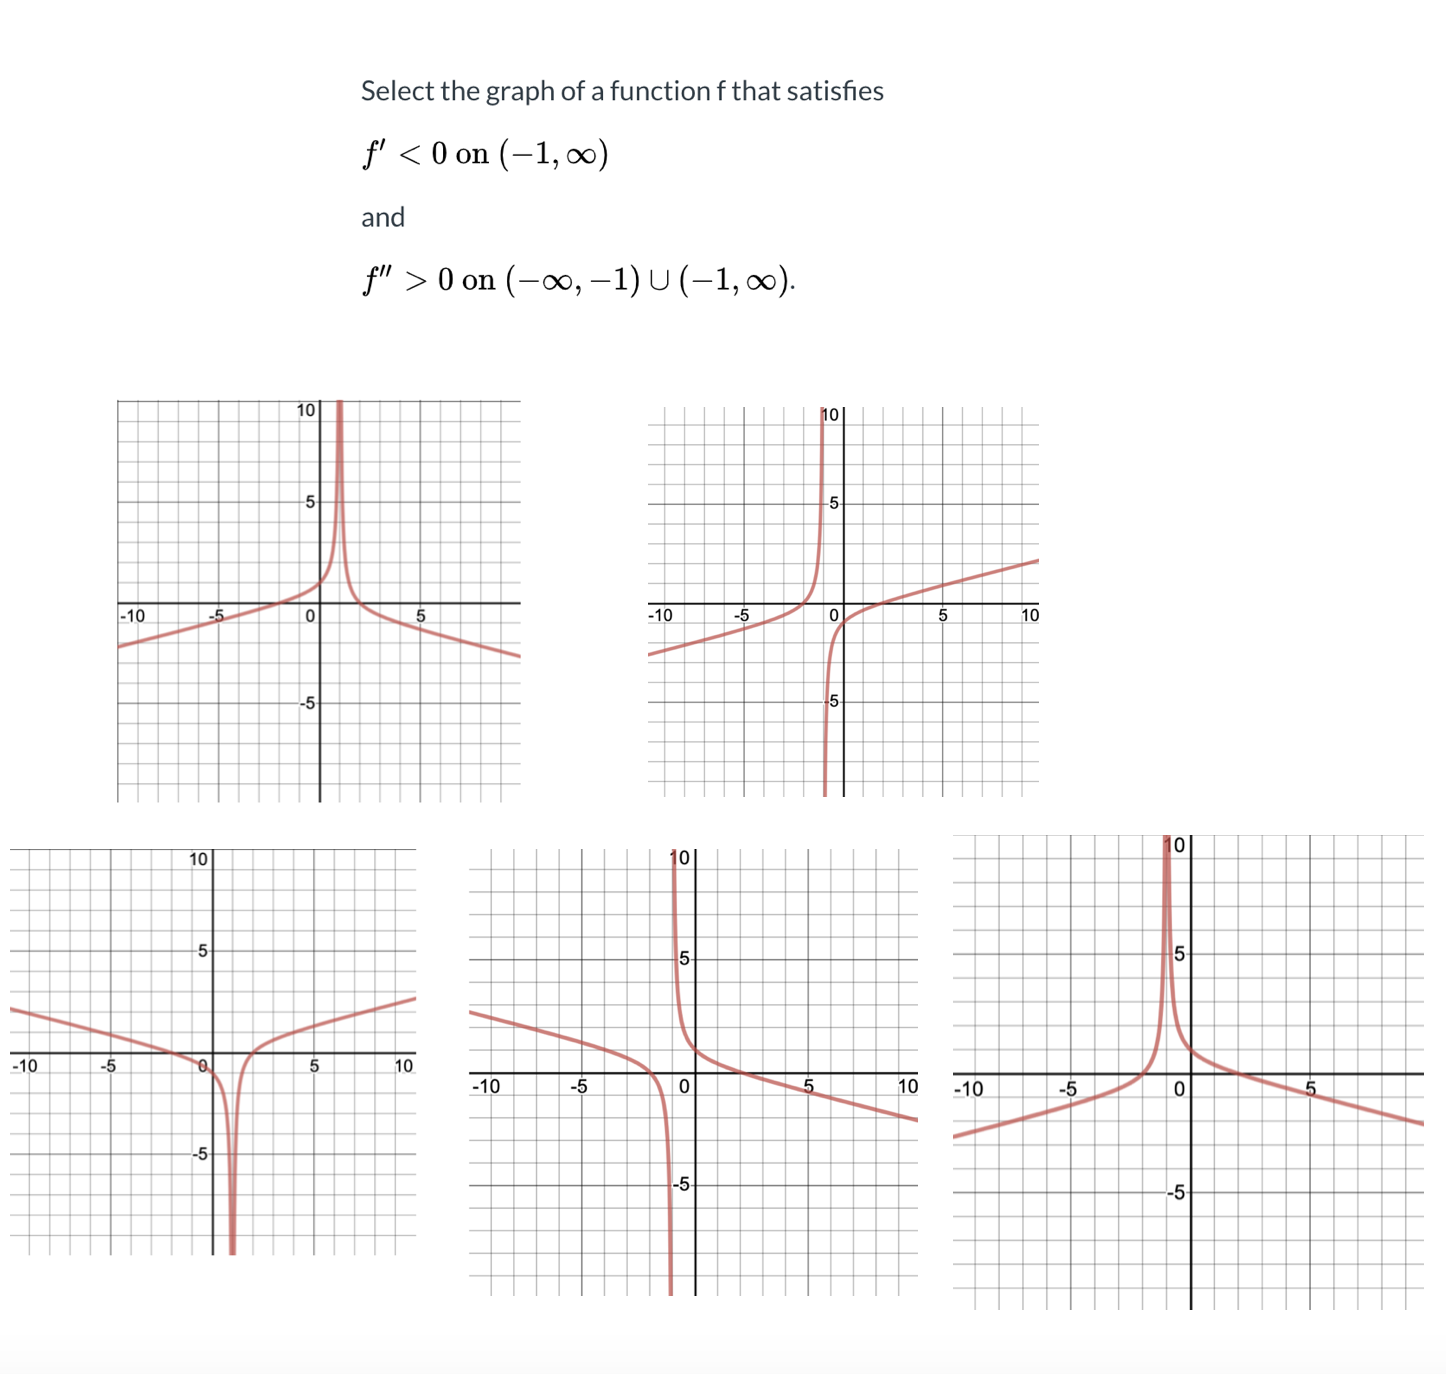 Select the graph of a function f that satisfies
f' < 0 on (-1, ∞)
and
f" > 0 on (-0, -1)U(-1, 0).
